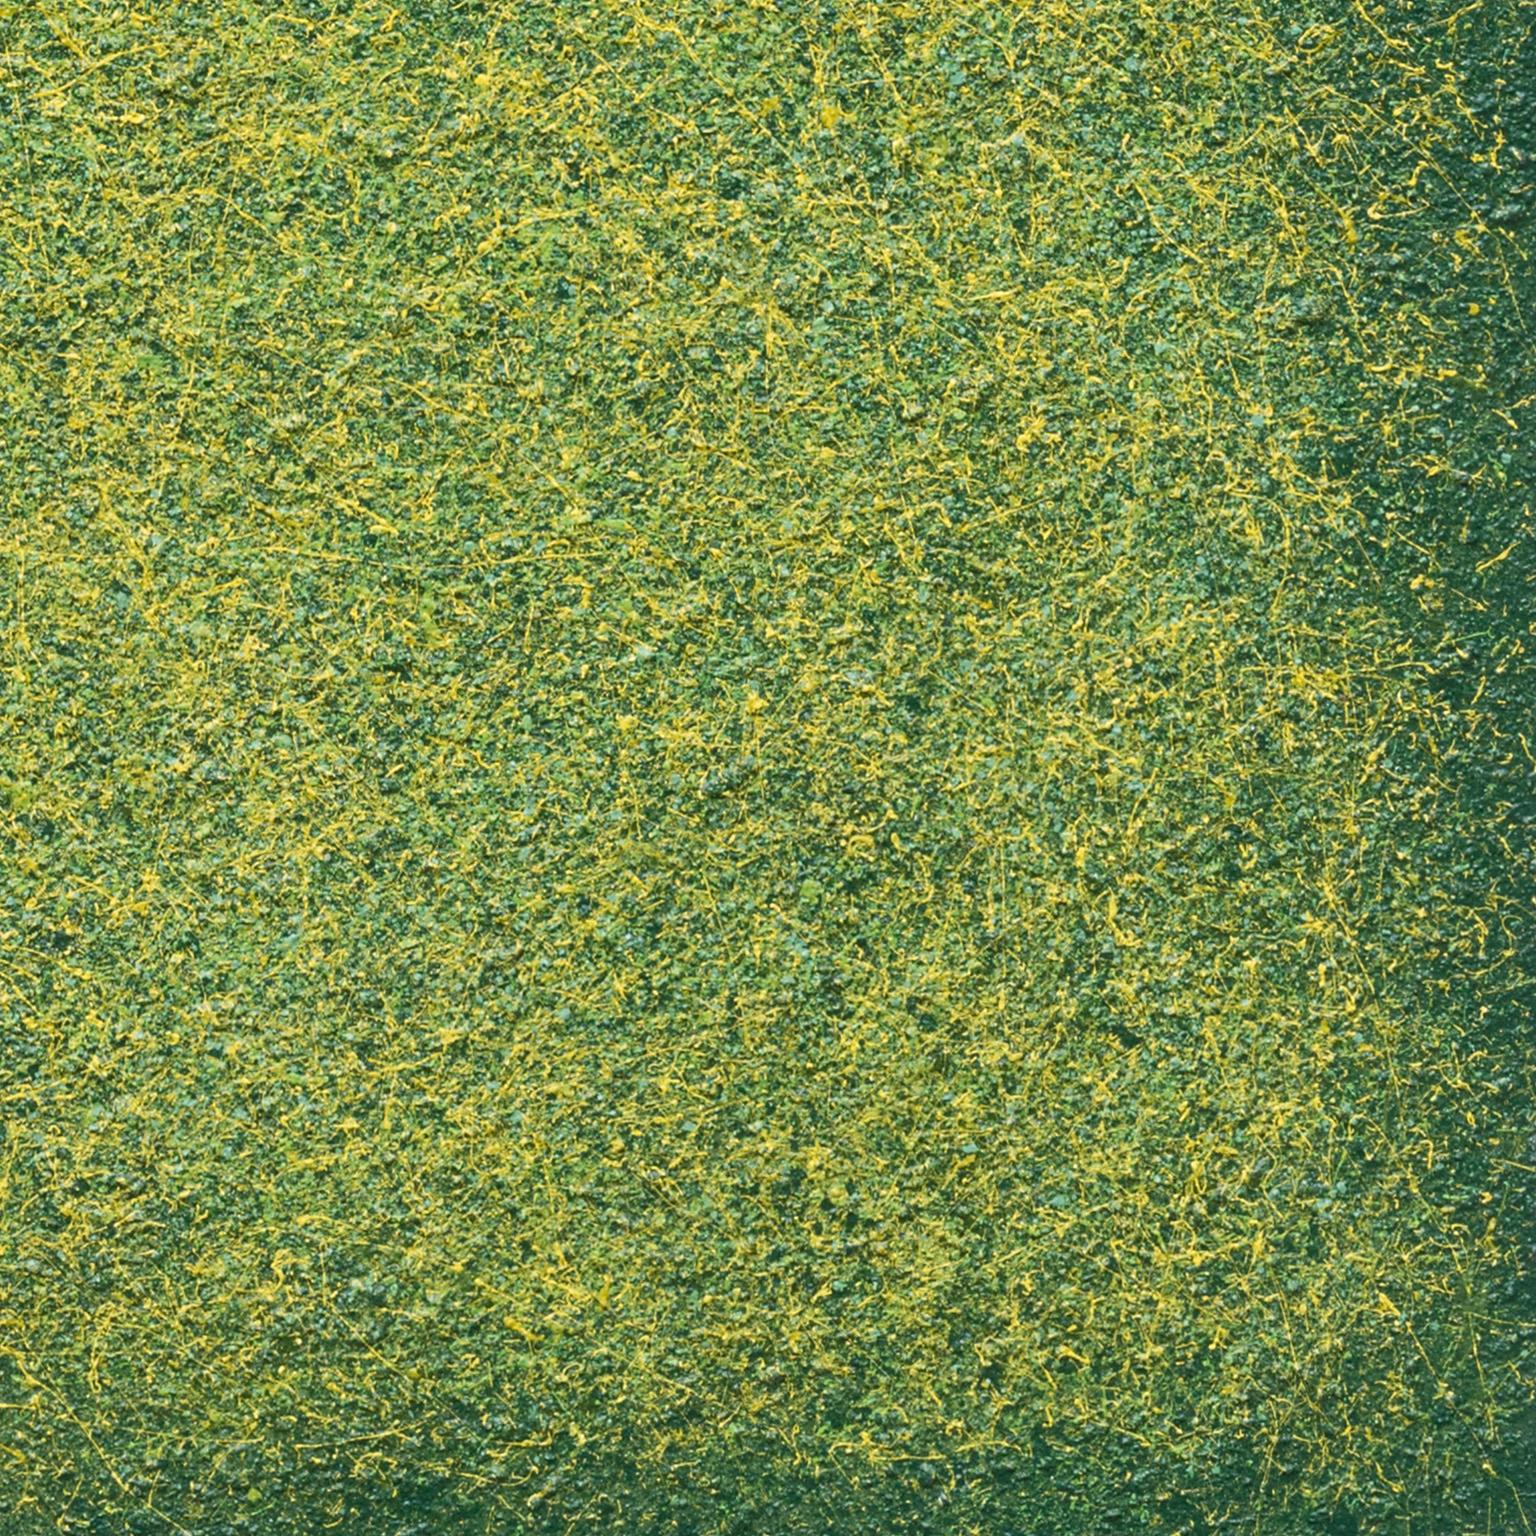 Warm Green Field - Green Color Field Painting 1